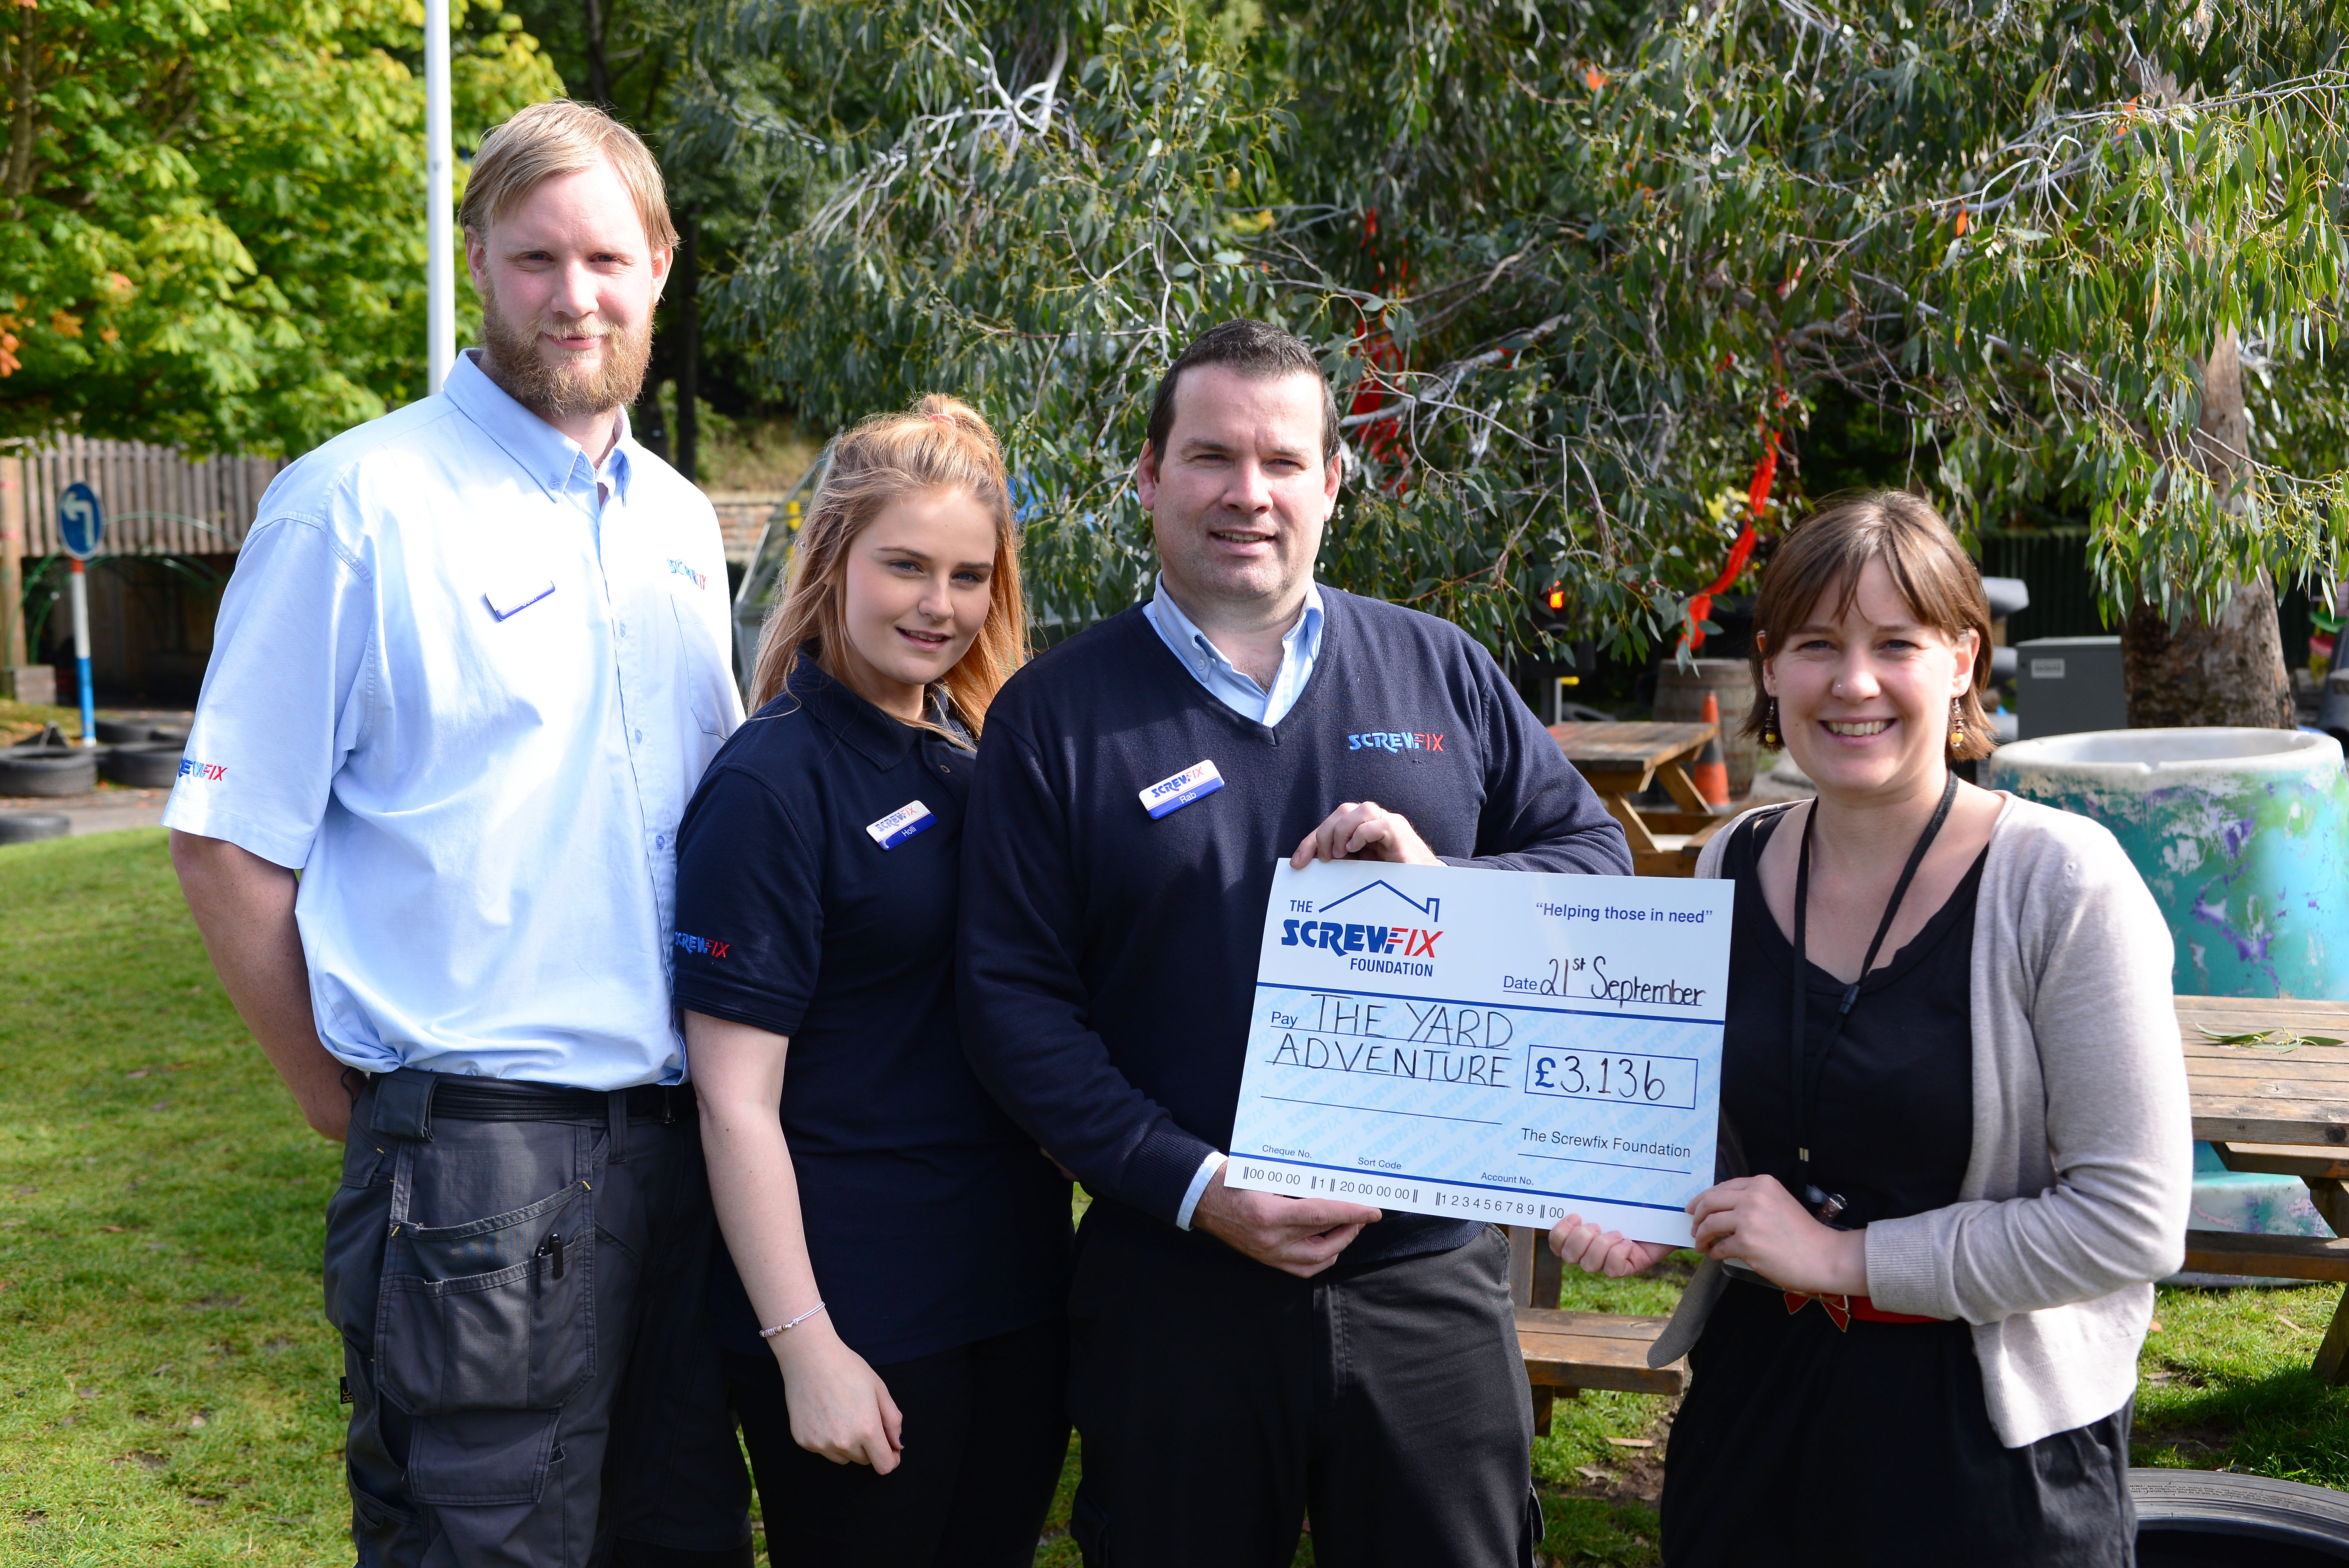 Edinburgh based charity gets a helping hand from The Screwfix Foundation